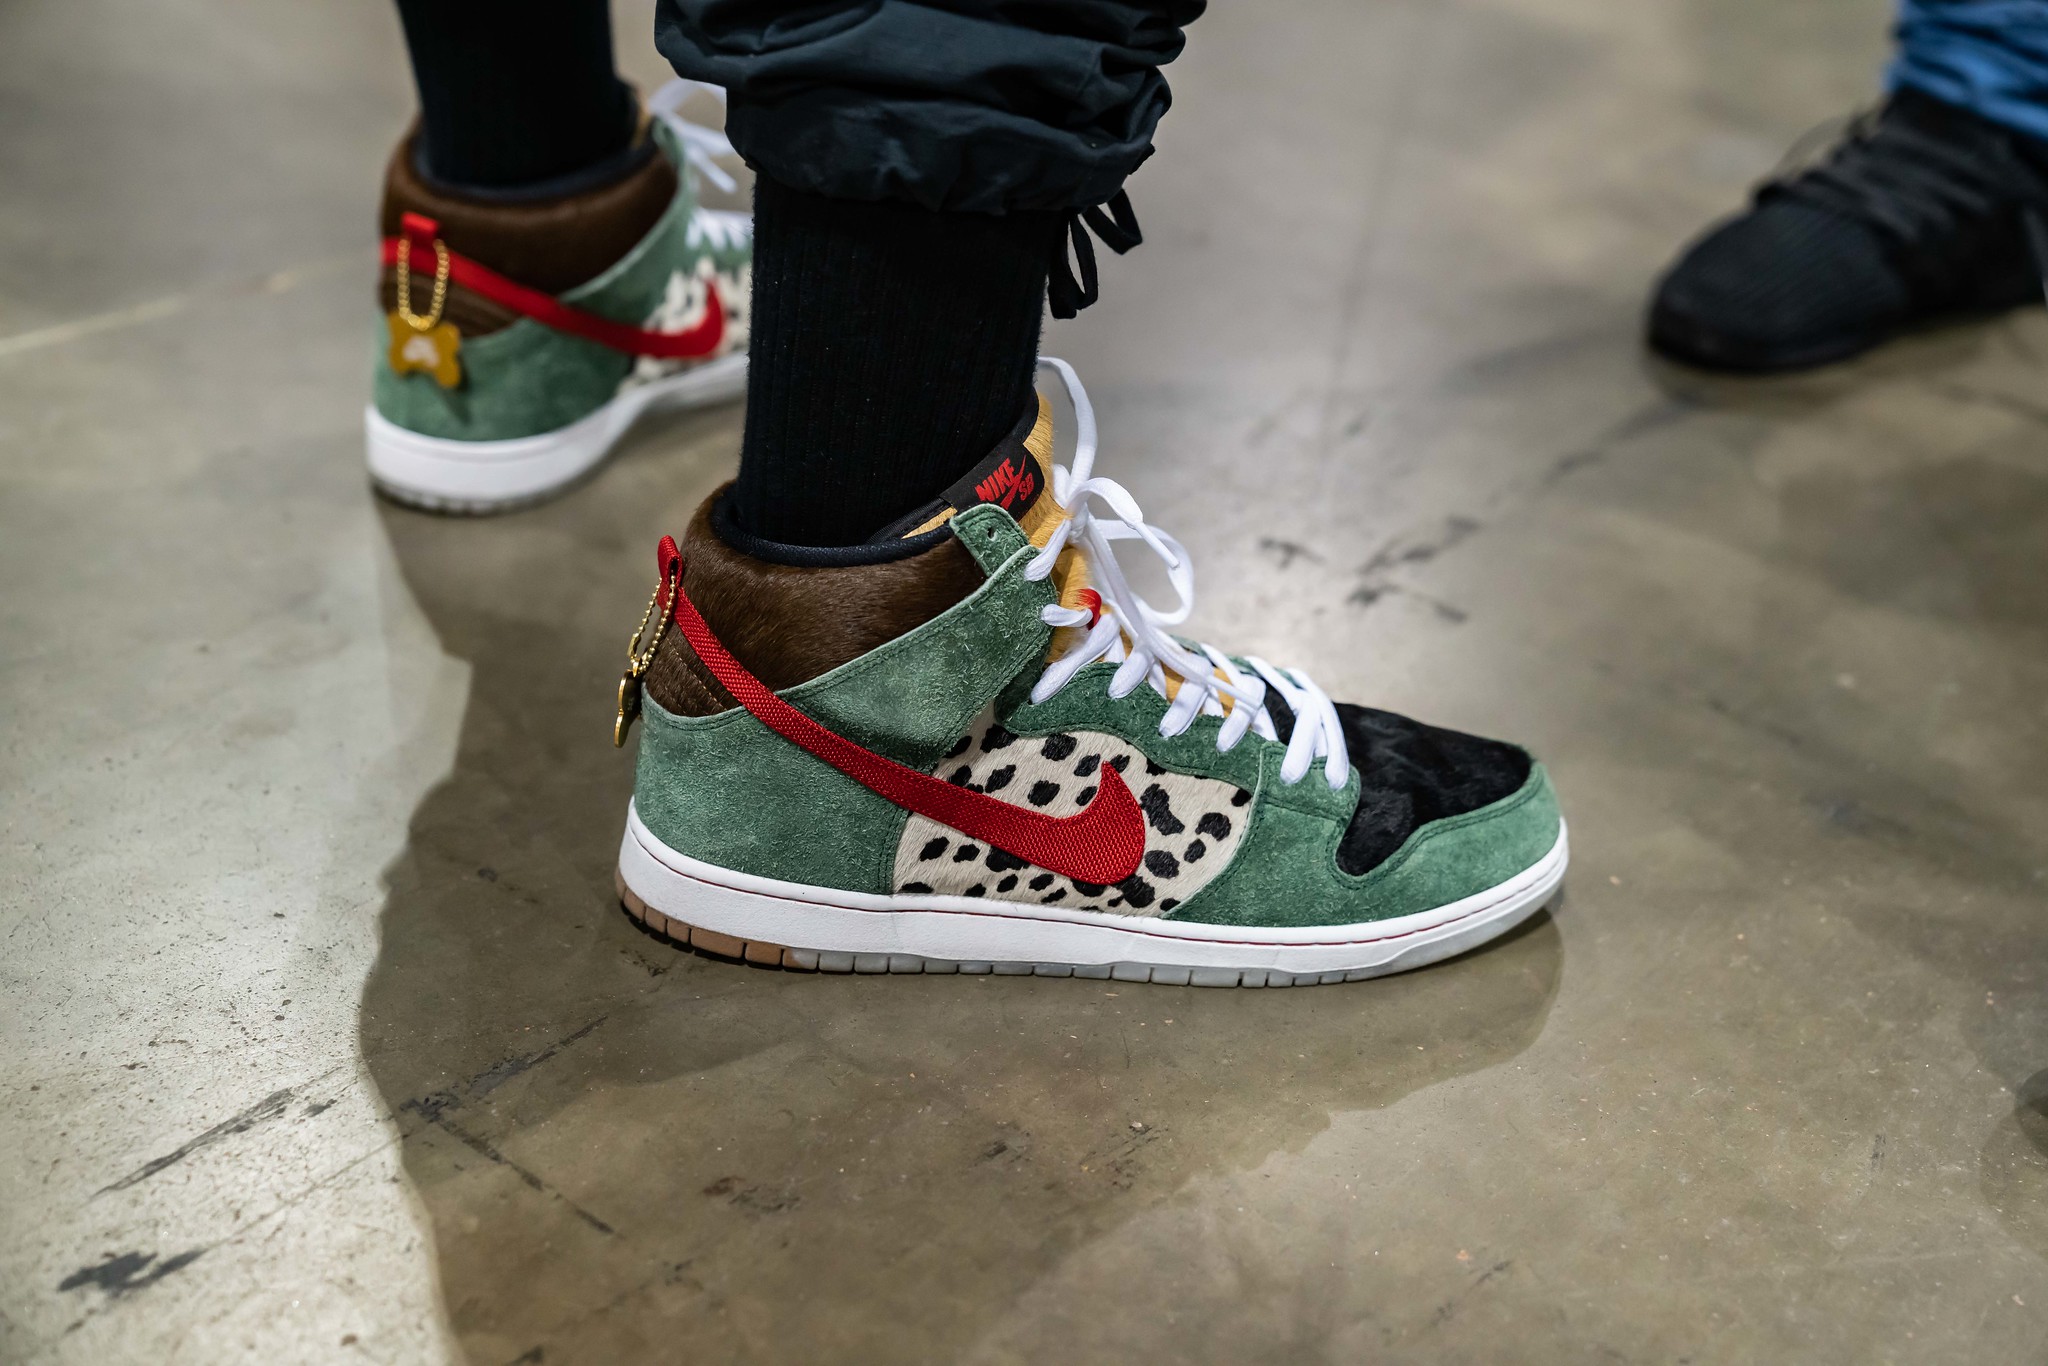 Omgaan met Systematisch Doe alles met mijn kracht Sneaker Con on Twitter: "Real talk, anyone purposely walk their dog(s) in  the Nike SB Dunk High Dog Walker(April 2019)? 🐶How do you feel about  these? Dig the color pattern combo? Have